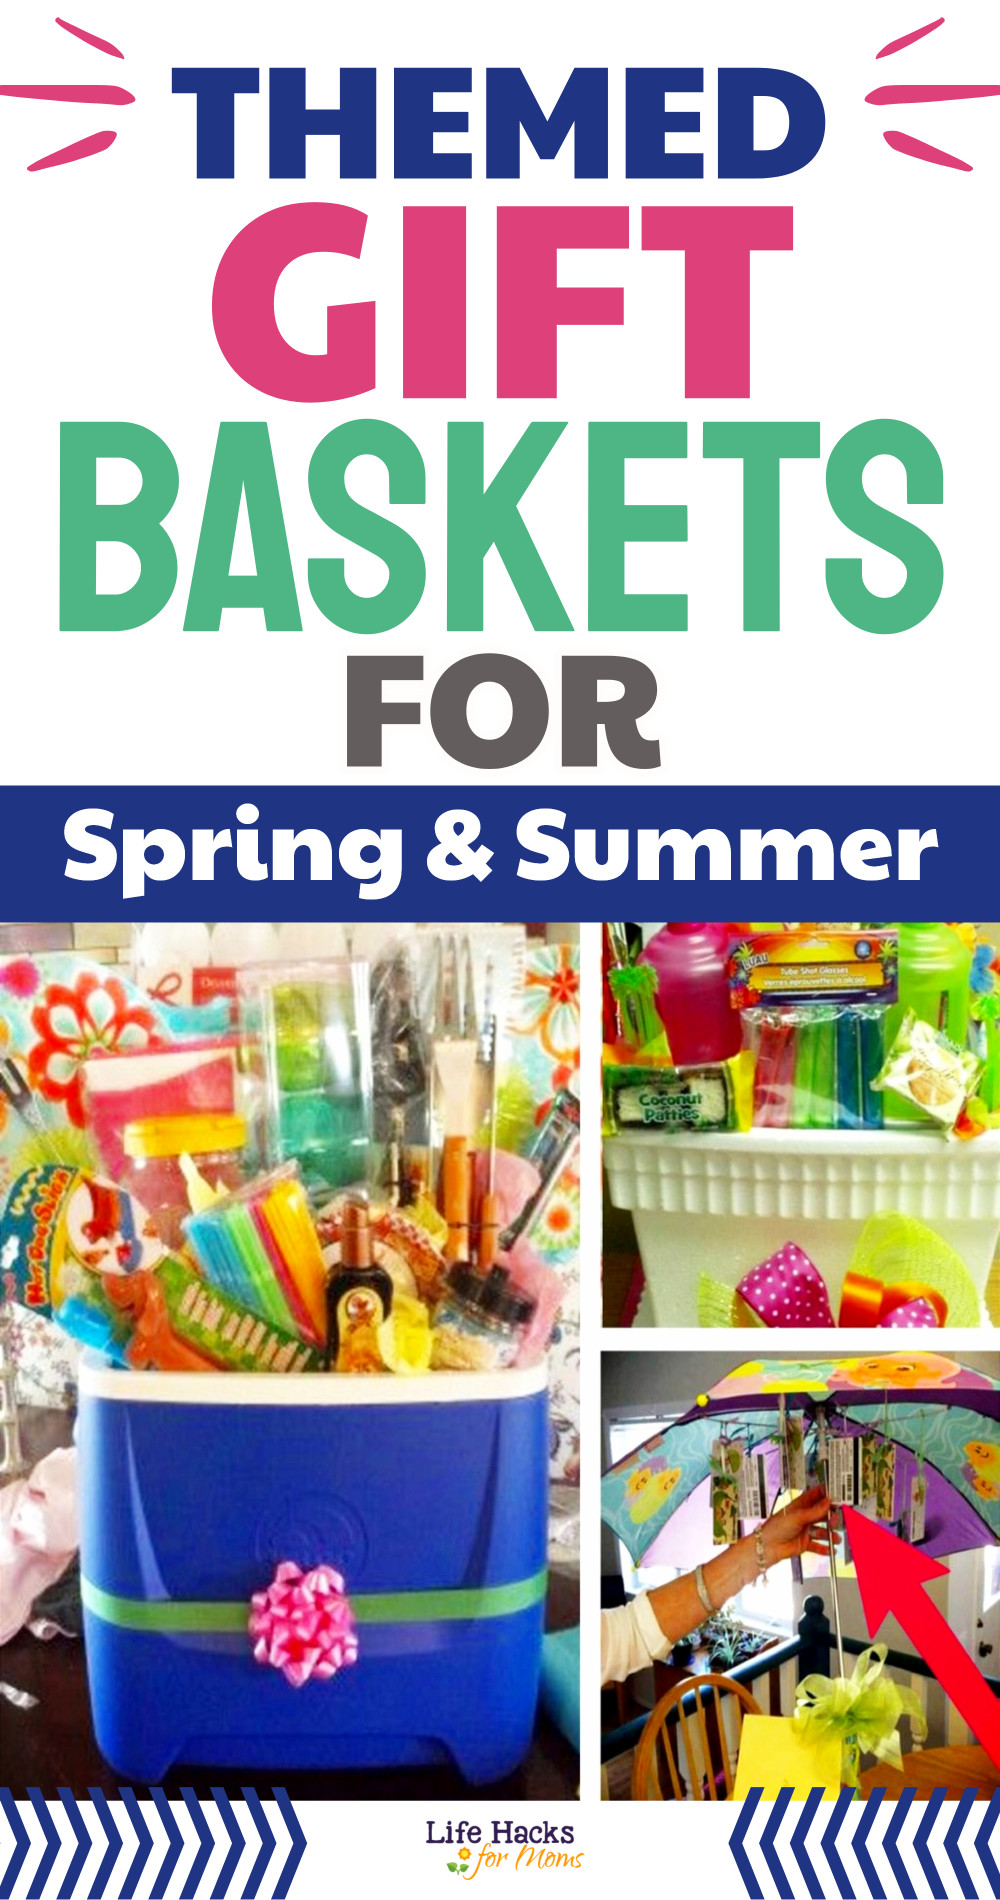 Themed gift baskets for Spring and Summer